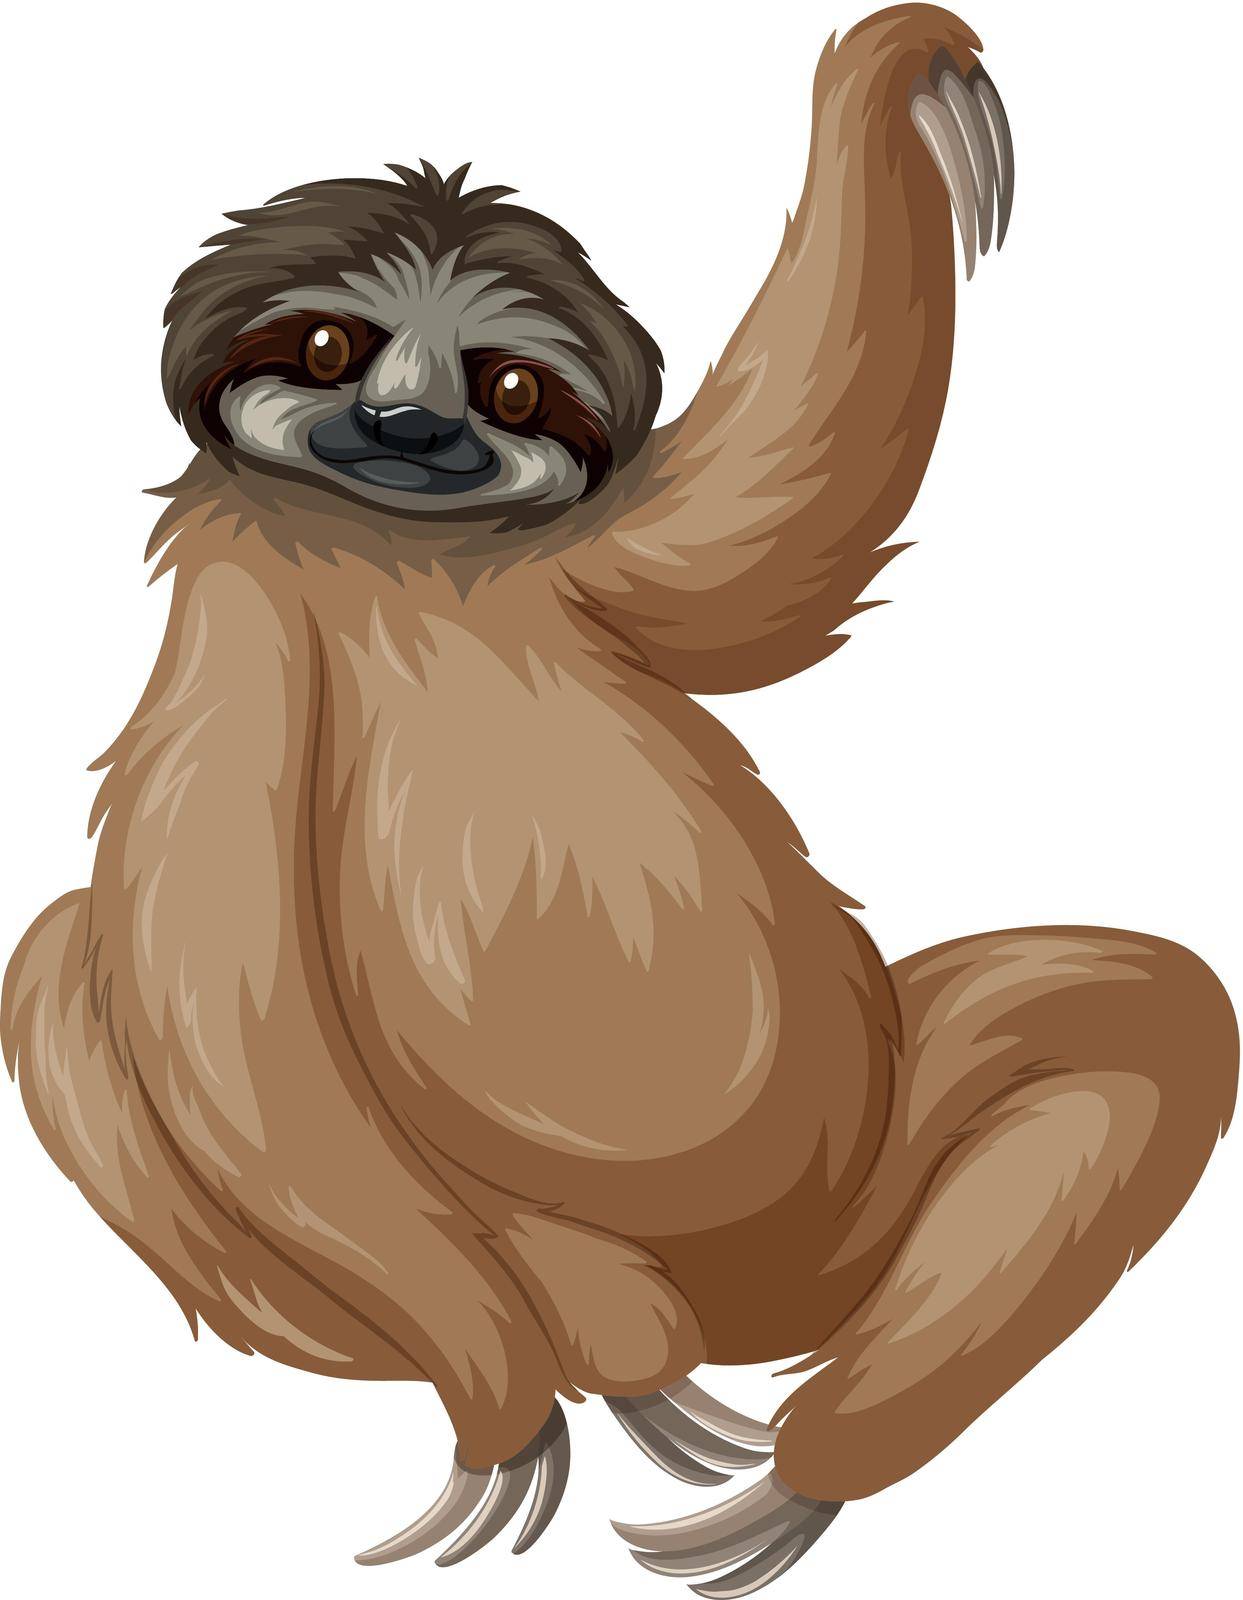 Sloth lifting one arm up by iimages